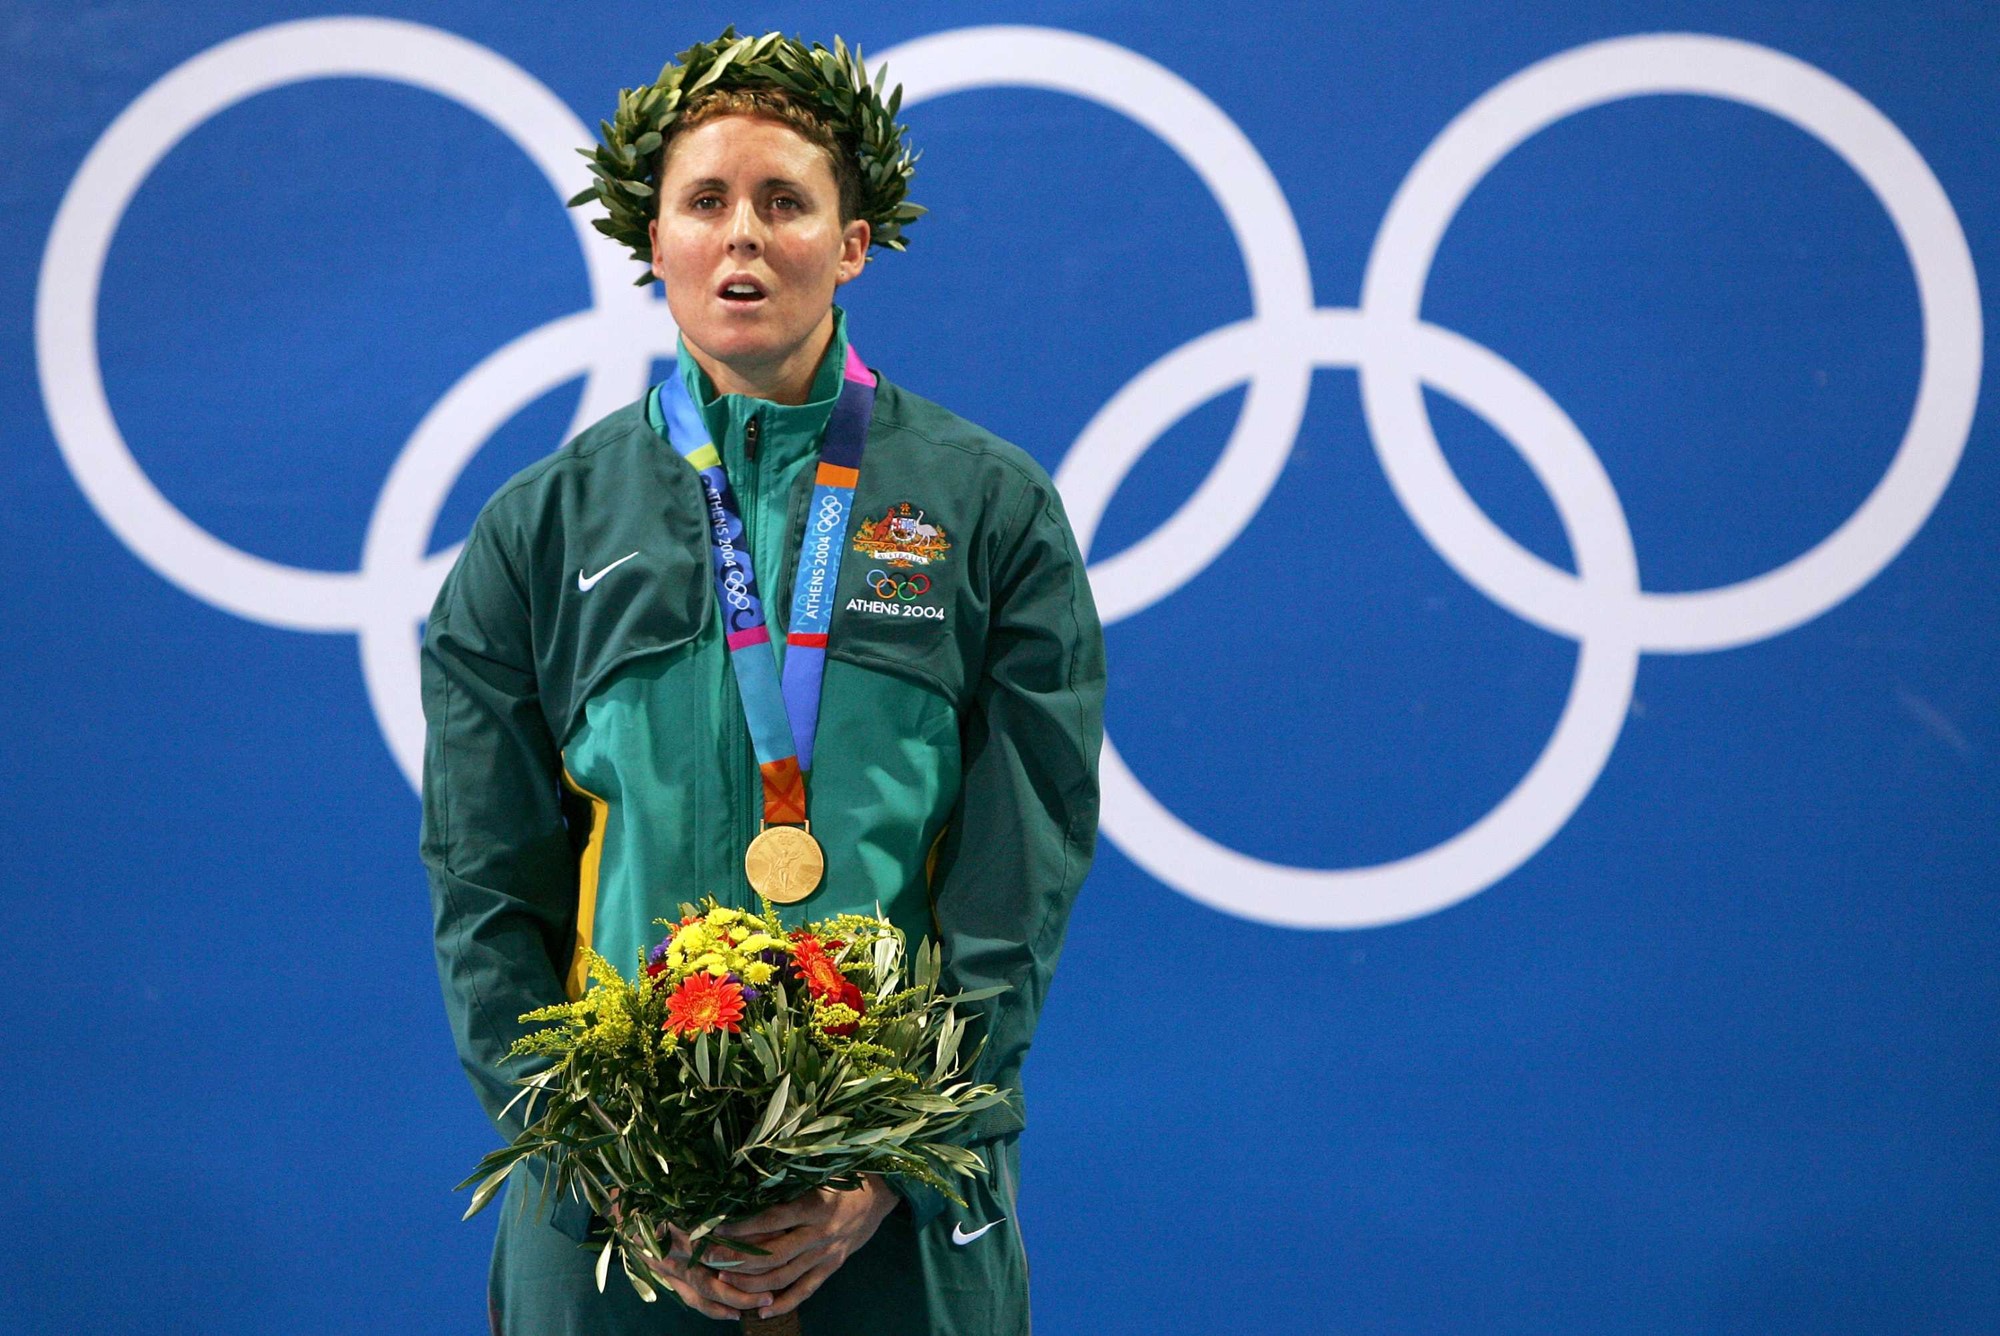 Petria Thomas with a medal around her neck, holding flowers and with a wreath on her head.